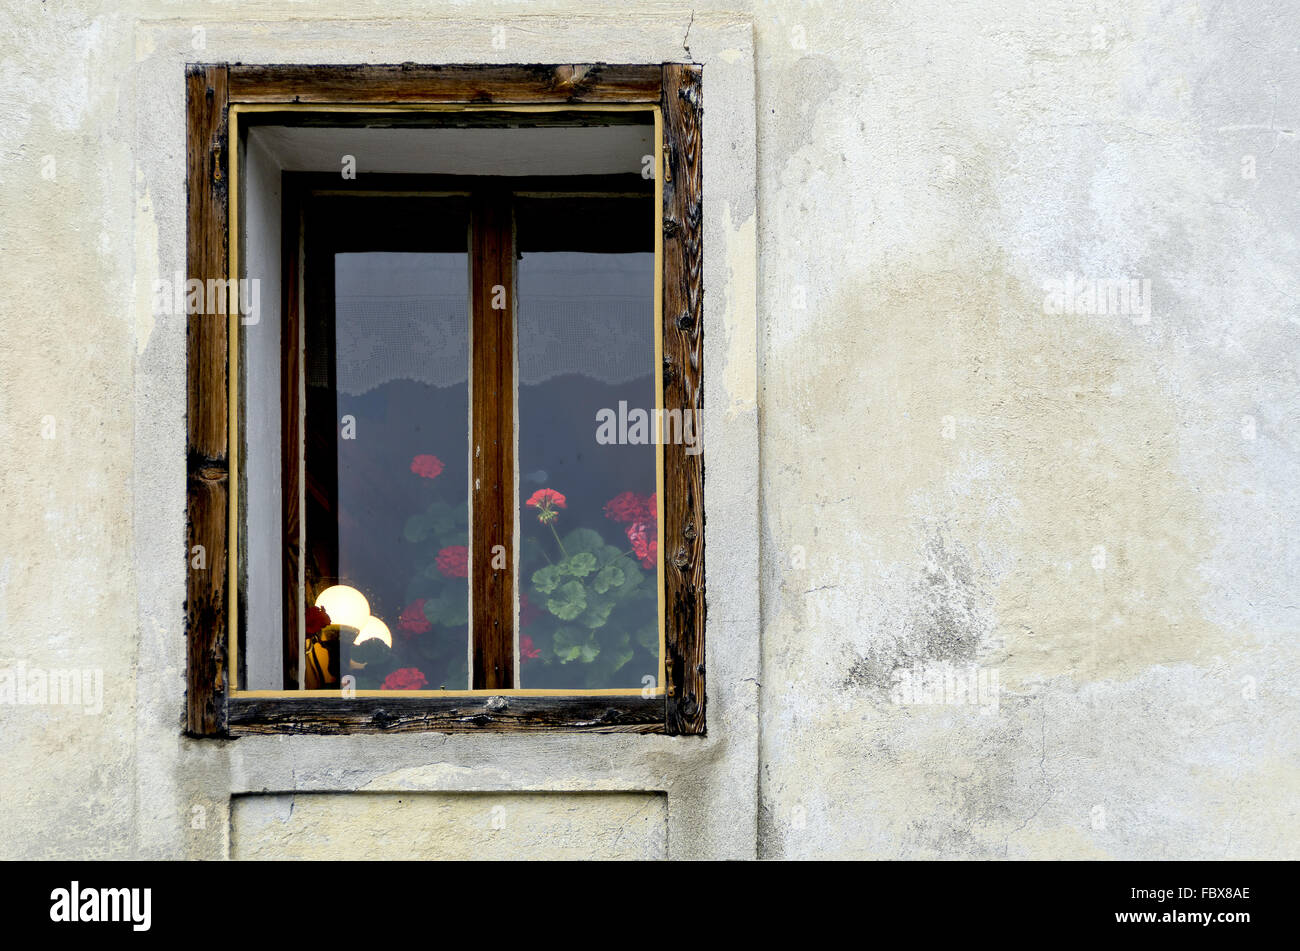 Old window with flowers Stock Photo